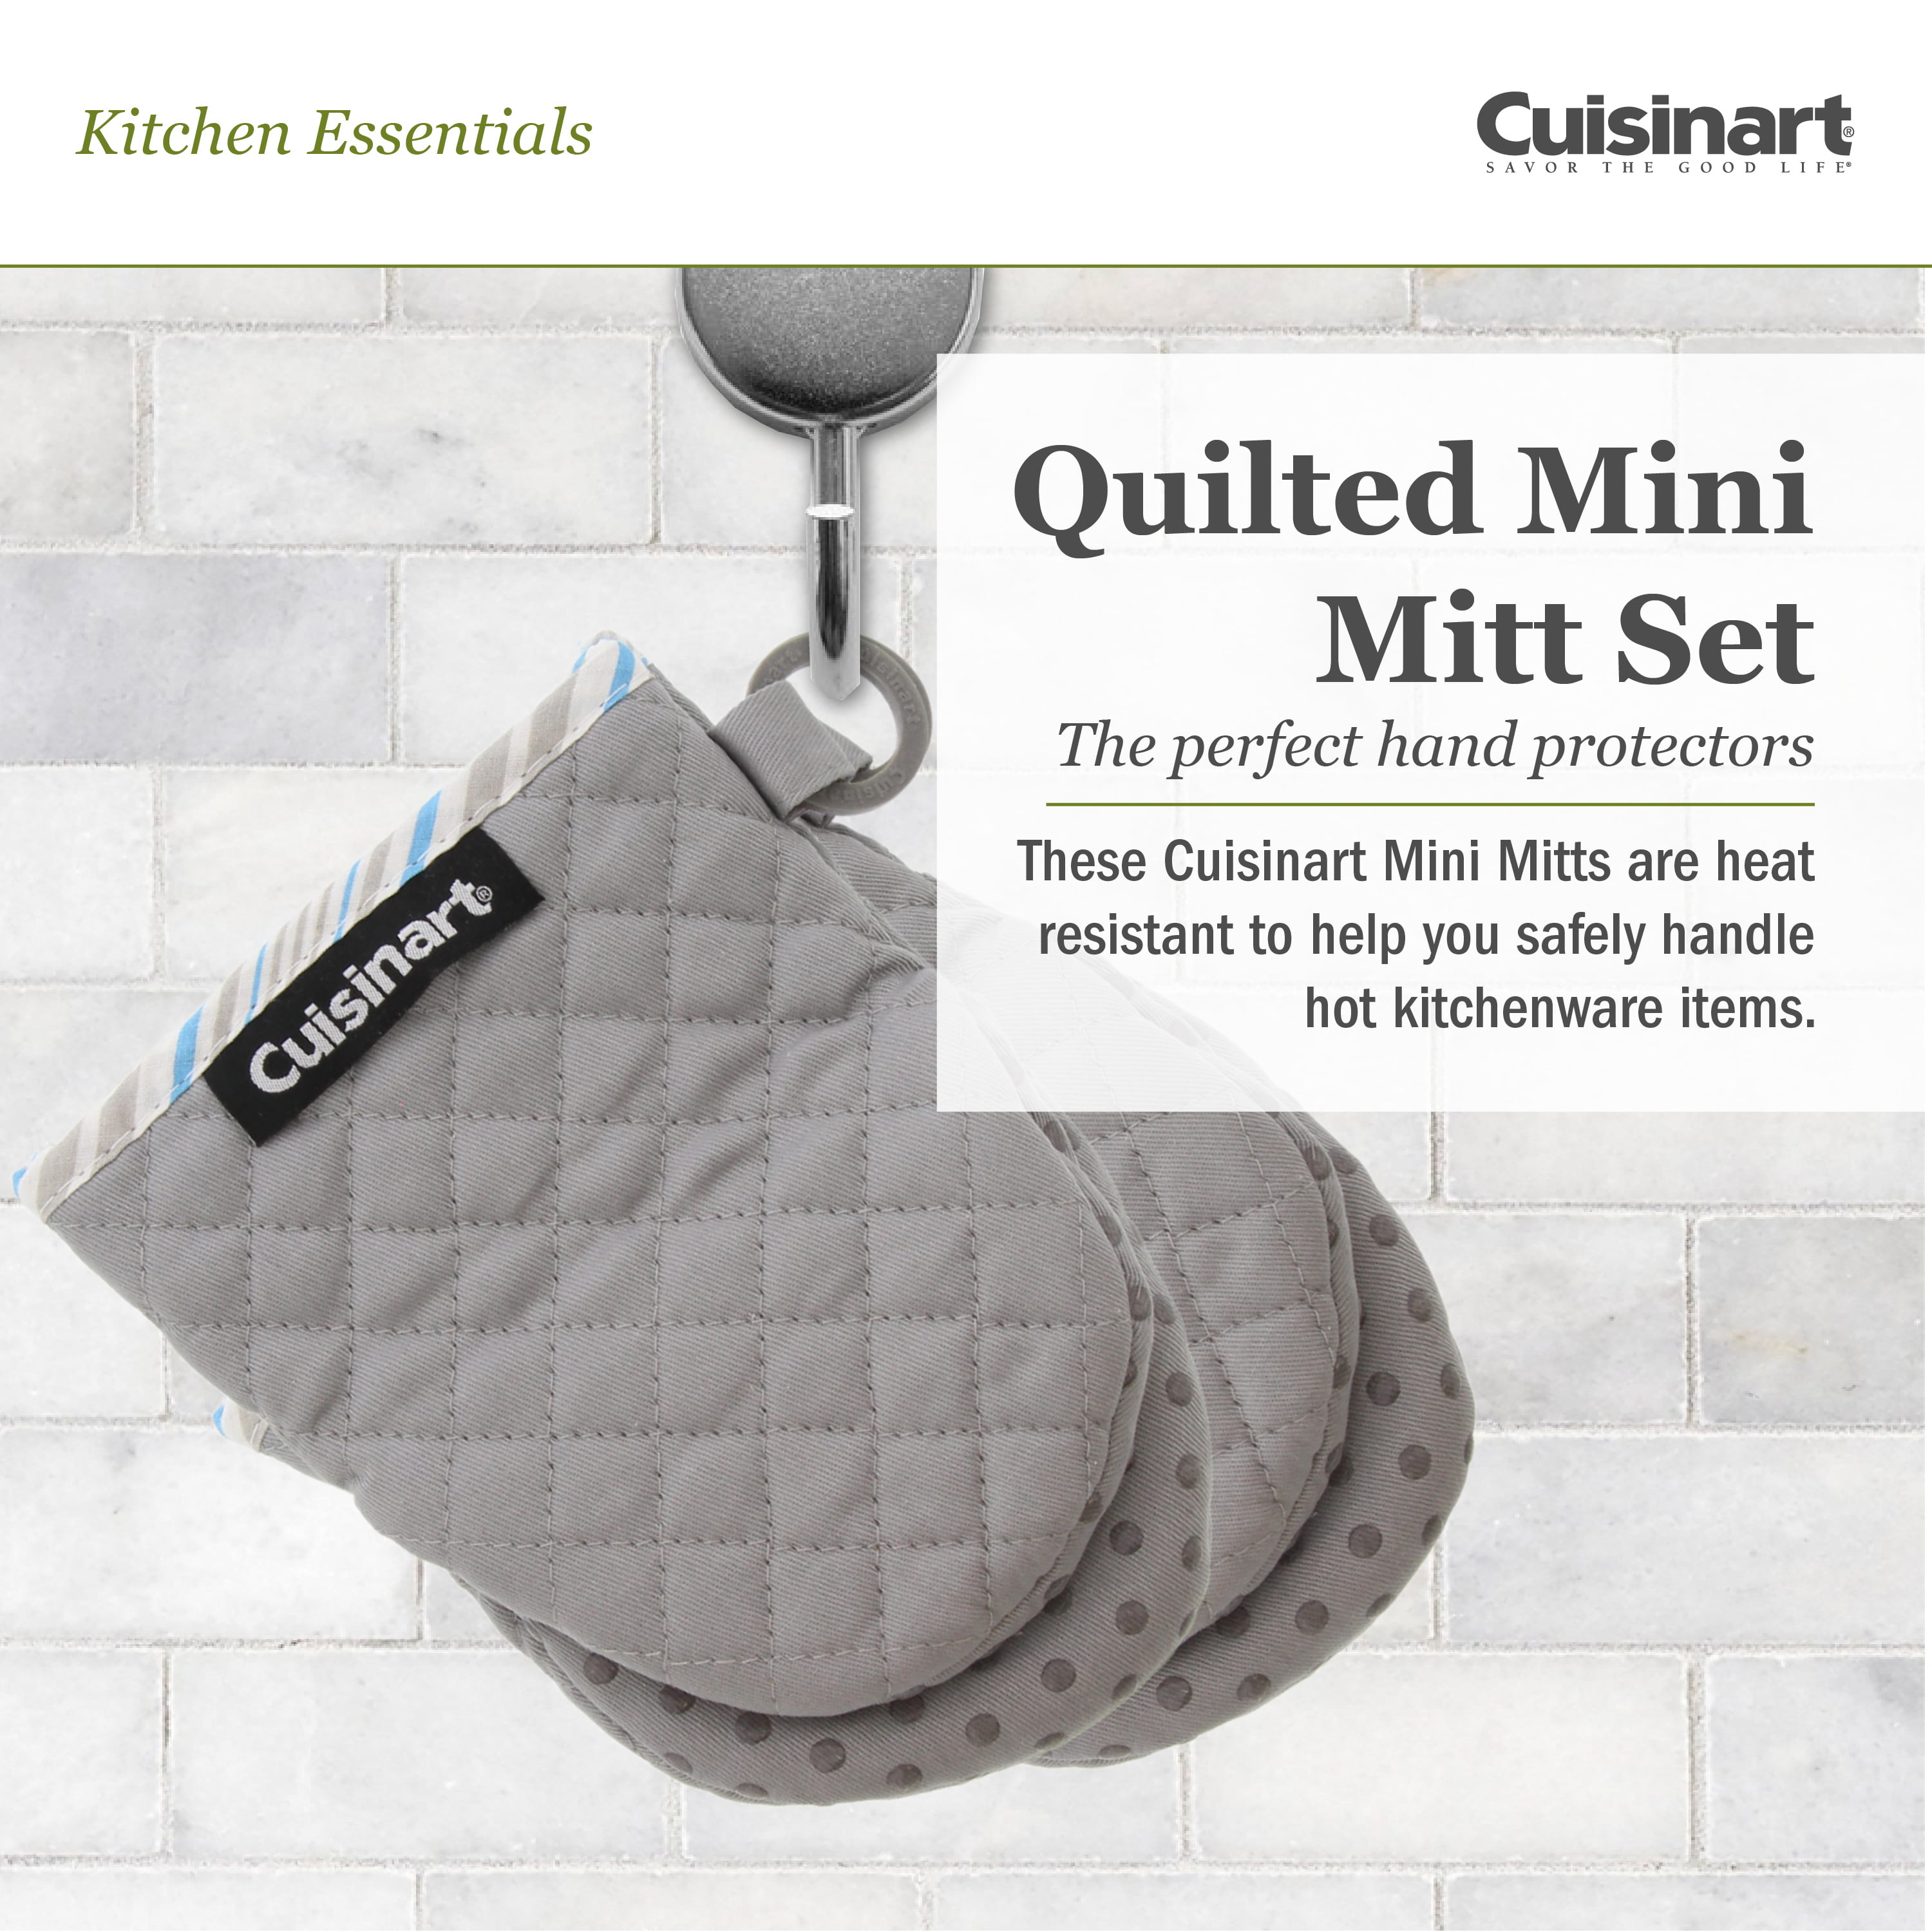 Cuisinart Silicone Oven Mitts, 2 Pack – Heat Resistant To 500